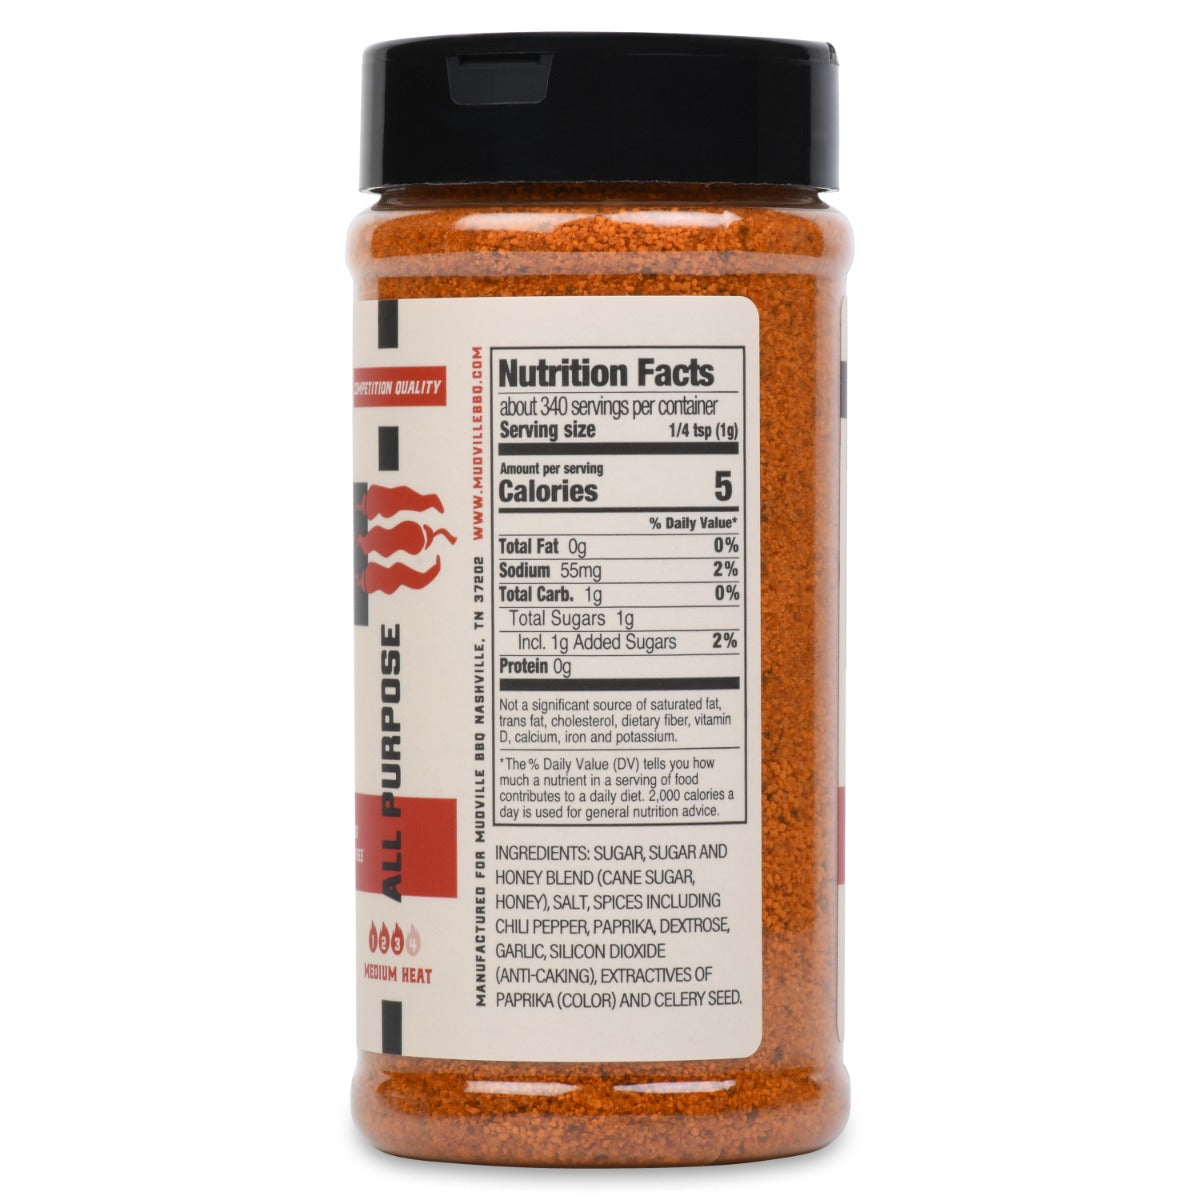 Side view of a bottle of Mudville BBQ Prime Heat All Purpose Rub showing the nutrition facts. The label details the serving size, calories, total fat, sodium, total carbohydrate, total sugars, and protein content. It also lists the ingredients, which include sugar, honey blend, salt, spices like chili pepper and paprika, and anti-caking agents.